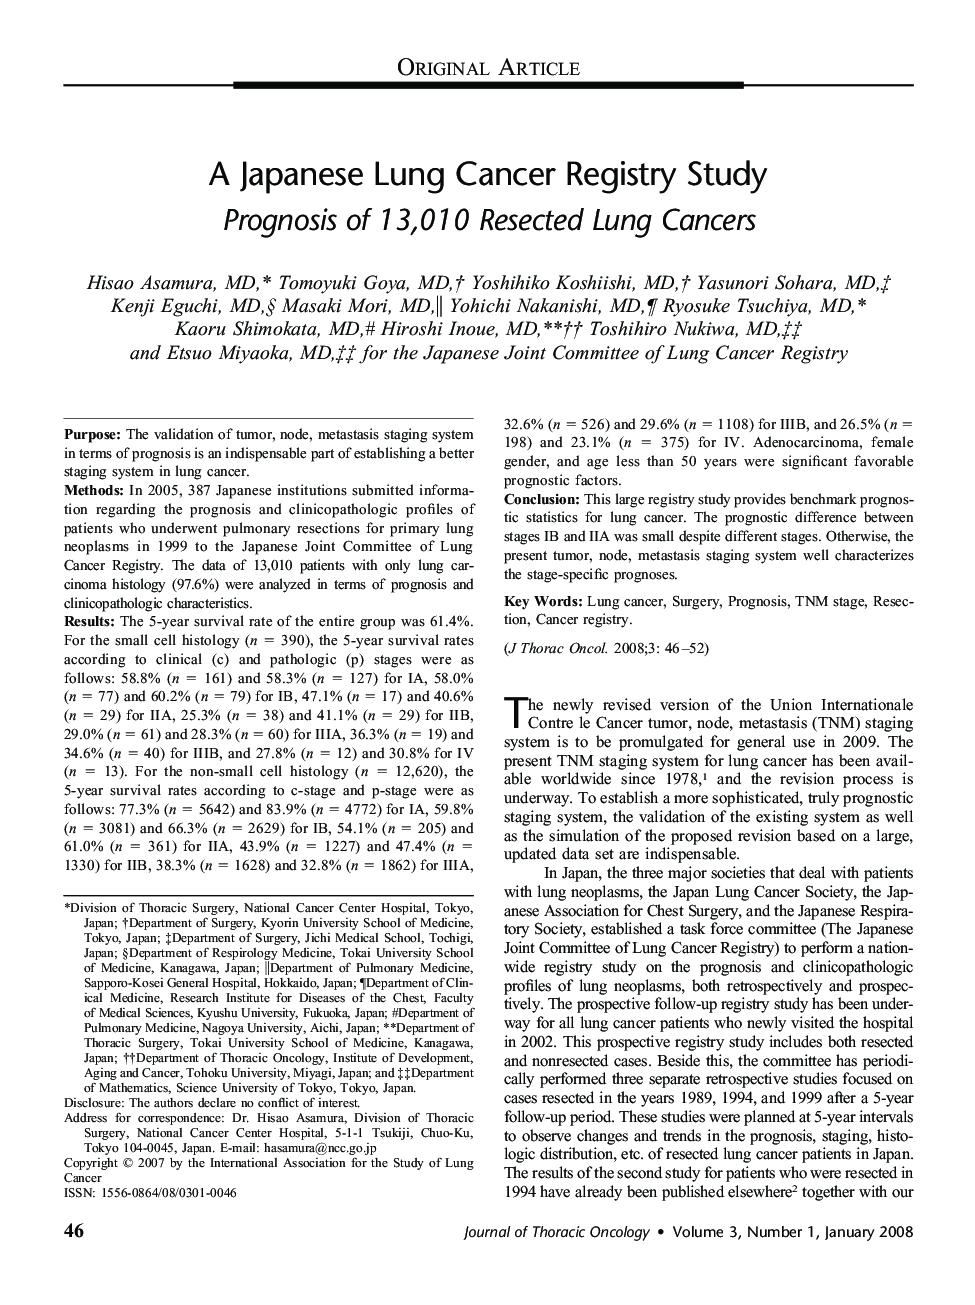 A Japanese Lung Cancer Registry Study: Prognosis of 13,010 Resected Lung Cancers 